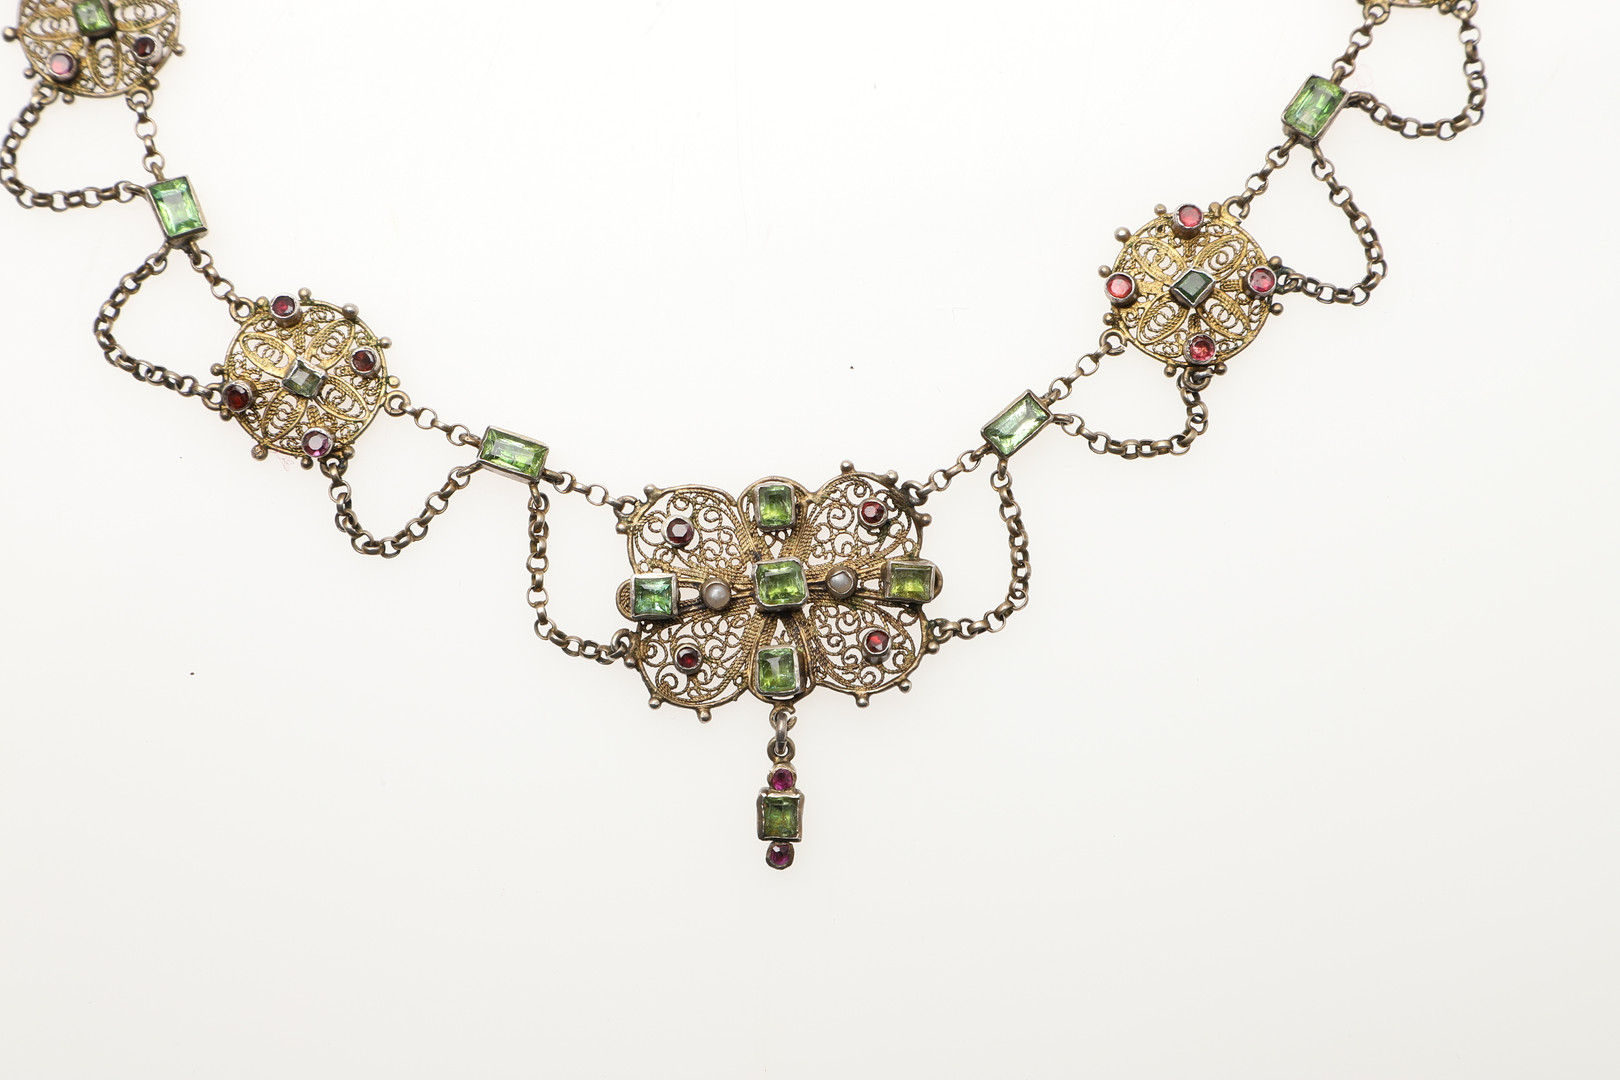 A 19TH CENTURY AUSTRO-HUNGARIAN GEM SET NECKLACE. - Image 6 of 7